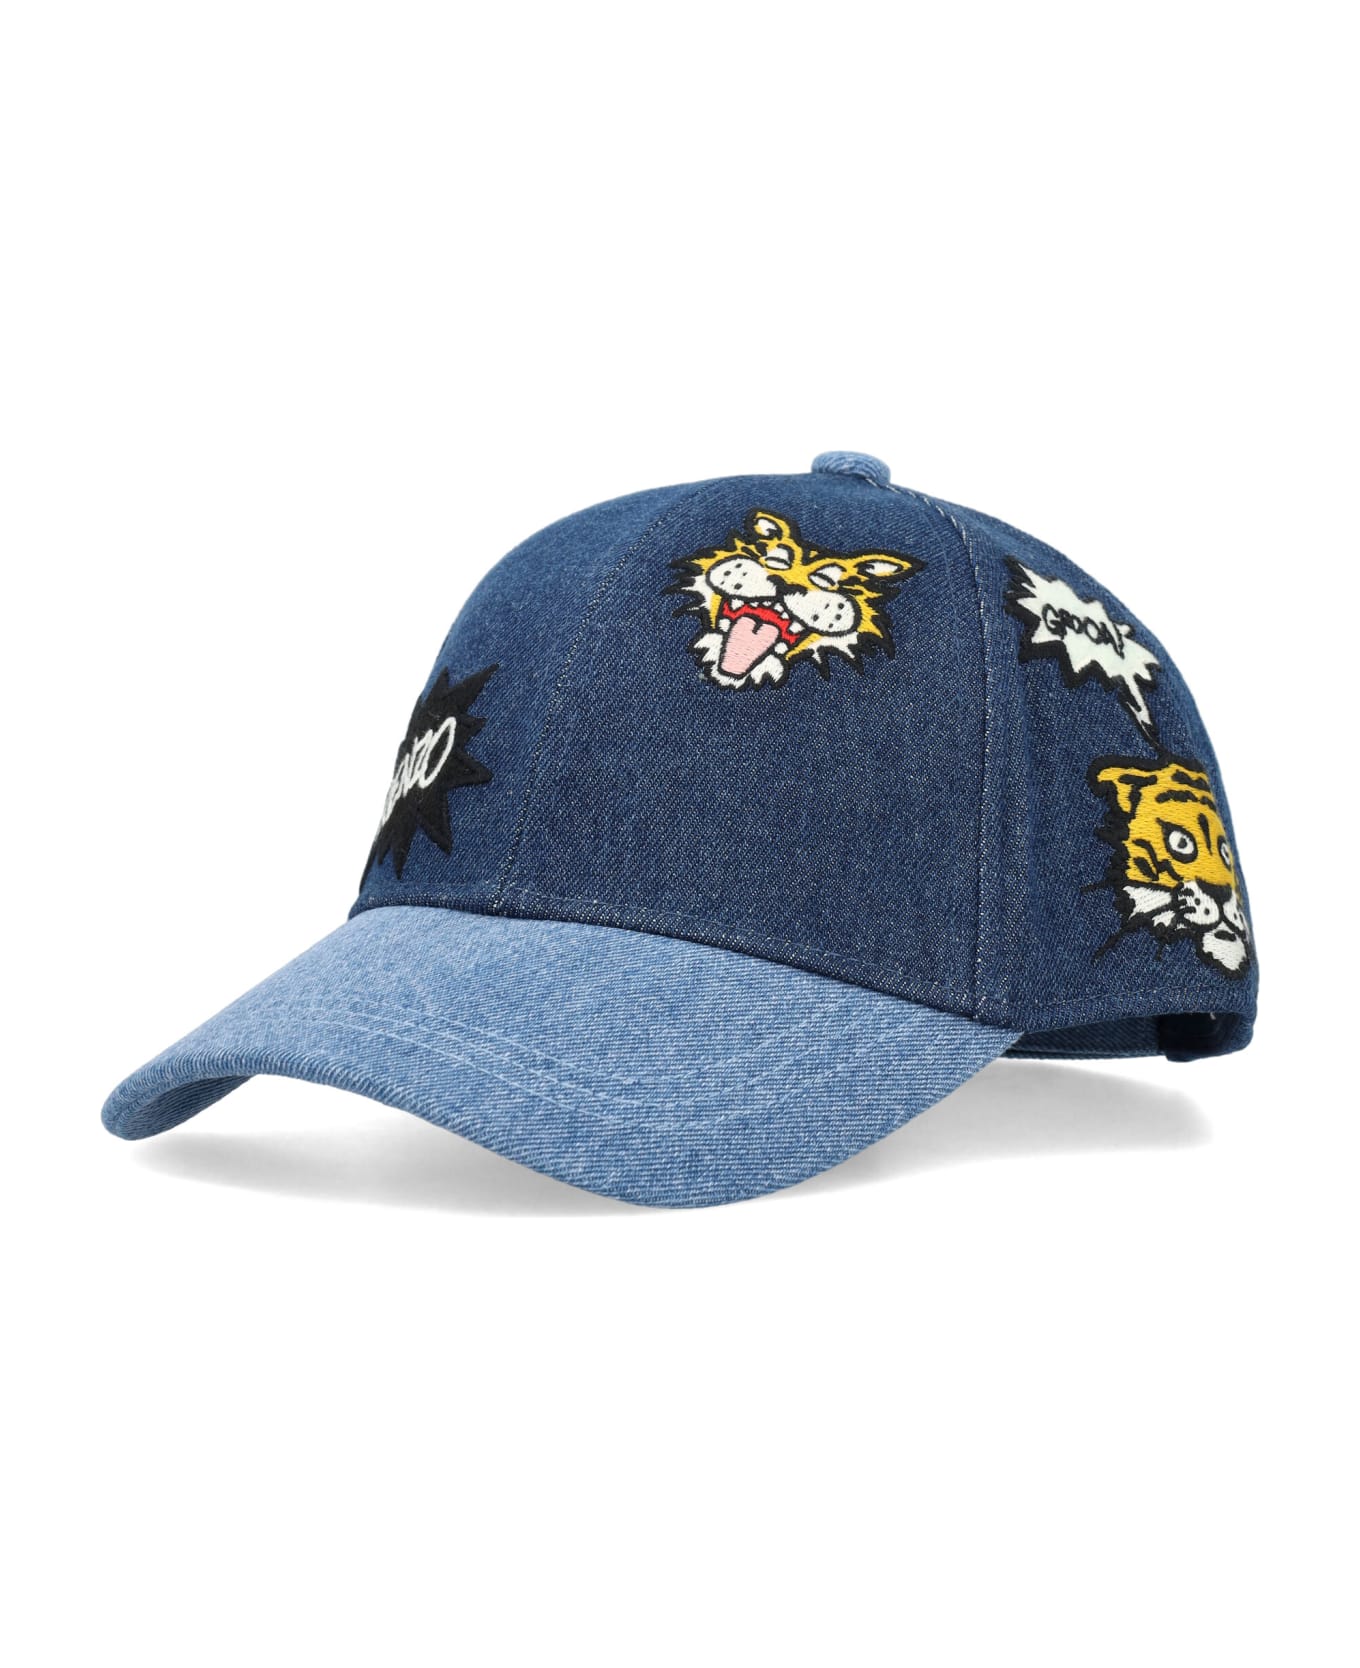 Kenzo Kids Multi Patches Cap - BLEACH アクセサリー＆ギフト